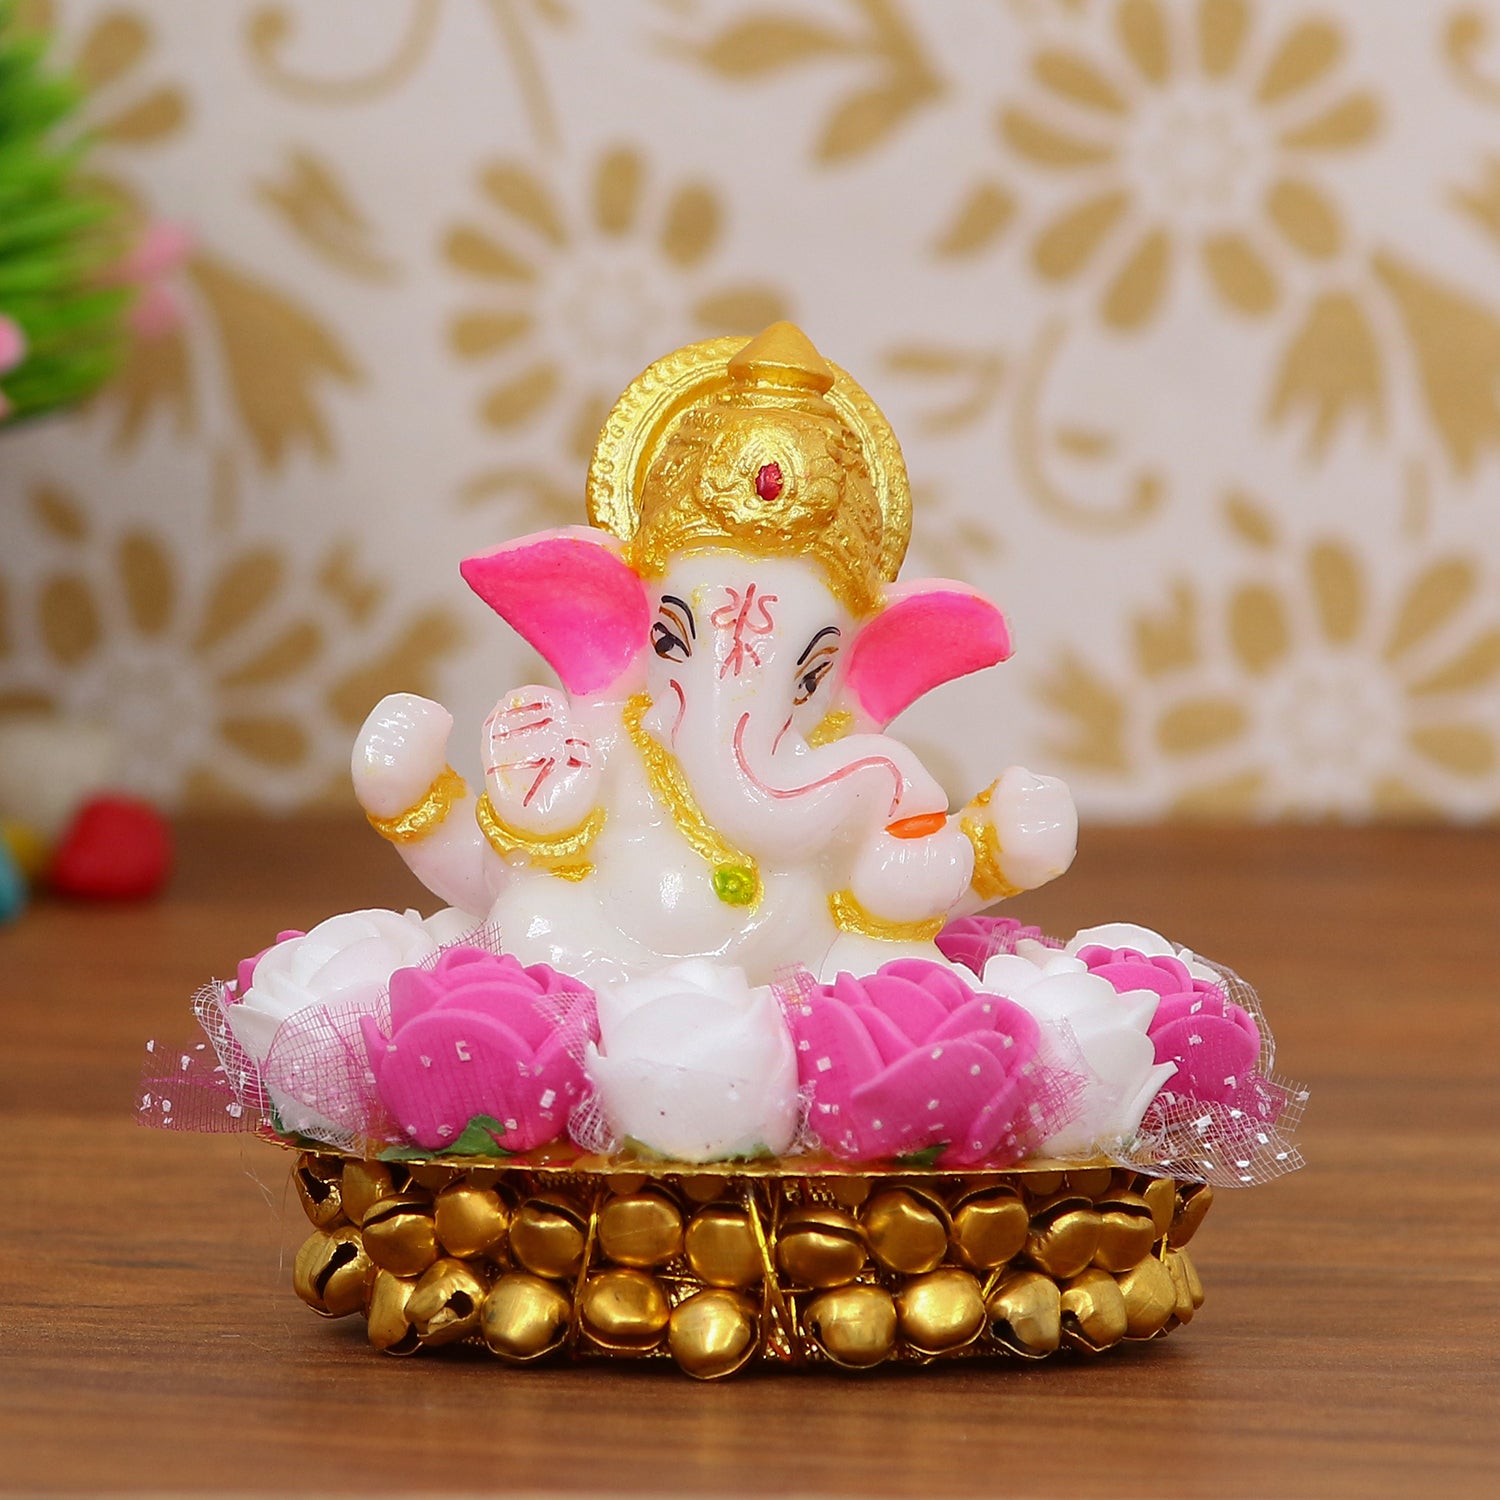 Golden and White Polyresin Lord Ganesha Idol on Decorative Handcrafted Plate with Pink and White Flowers